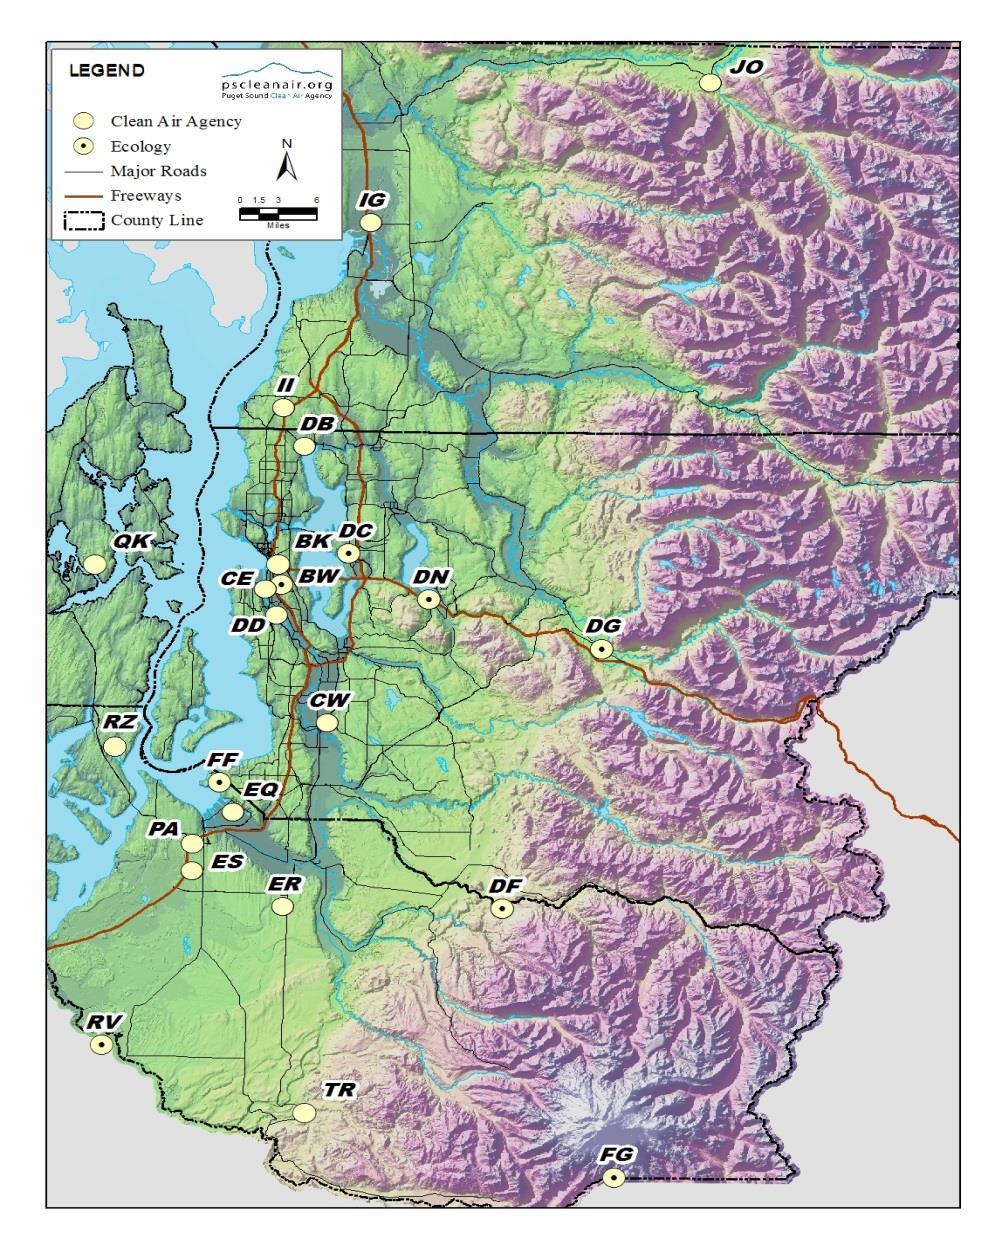 2015 Air Quality Data Summary Monitoring Network The Agency and Ecology operated the Puget Sound region's monitoring network in 2016.